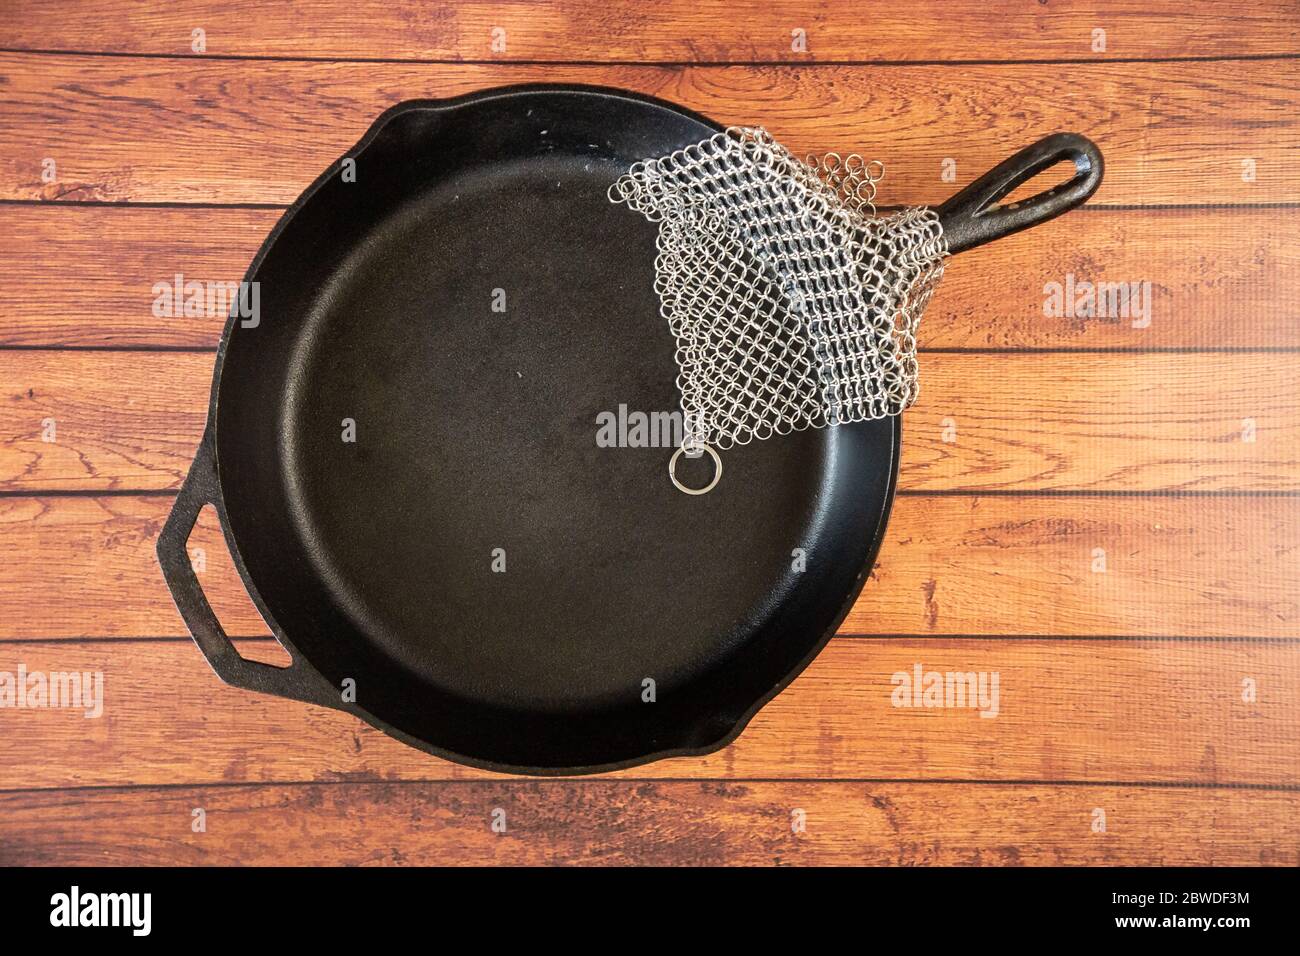 https://c8.alamy.com/comp/2BWDF3M/small-ring-chainmail-scrubber-for-cast-iron-stainless-steel-hard-anodized-cookware-and-other-pots-pans-for-for-cast-iron-cookware-dutch-ovens-2BWDF3M.jpg